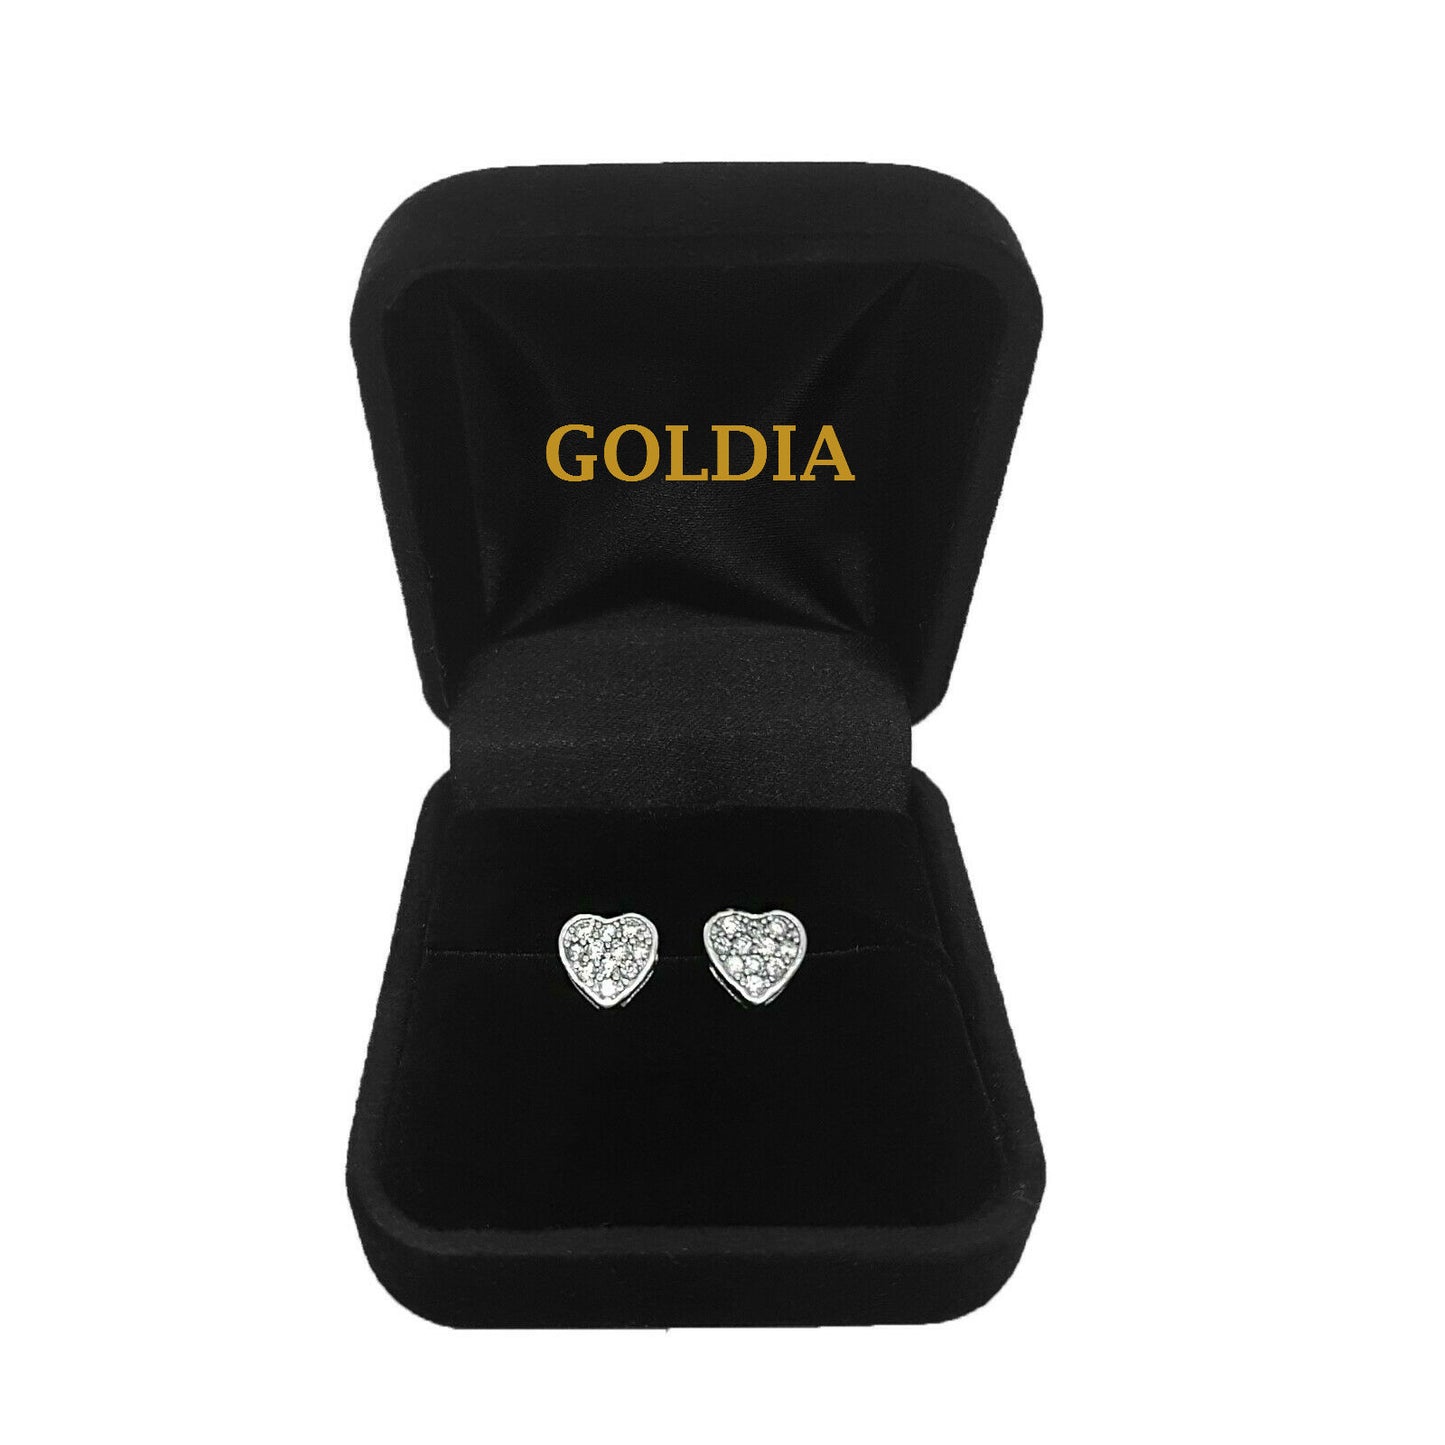 1/4 Carat TW Round Diamond Solitaire Stud Earrings in 14K White Gold